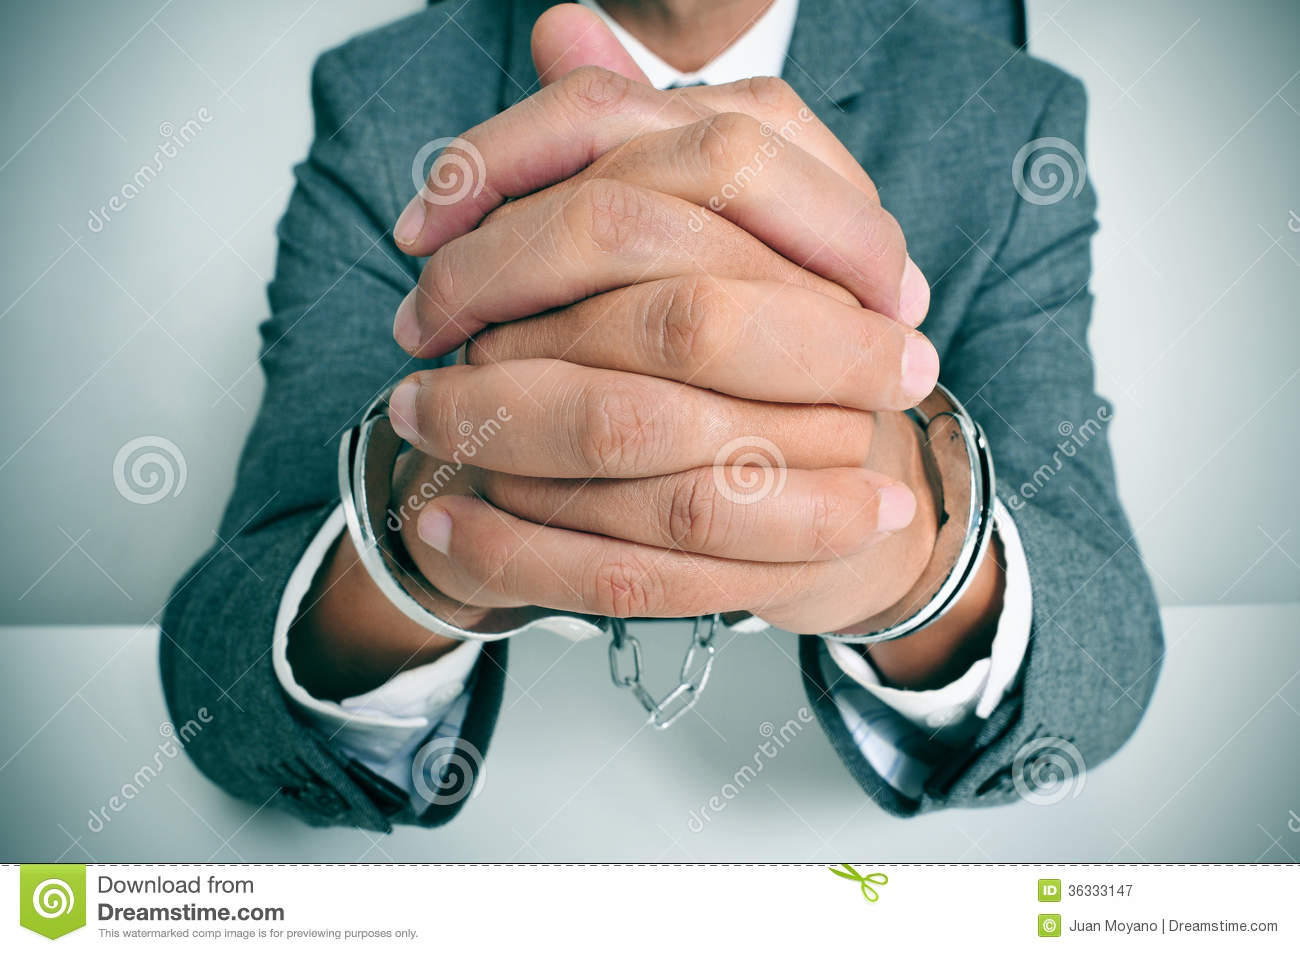 Handcuffed Man Royalty Free Stock Photography   Image  36333147